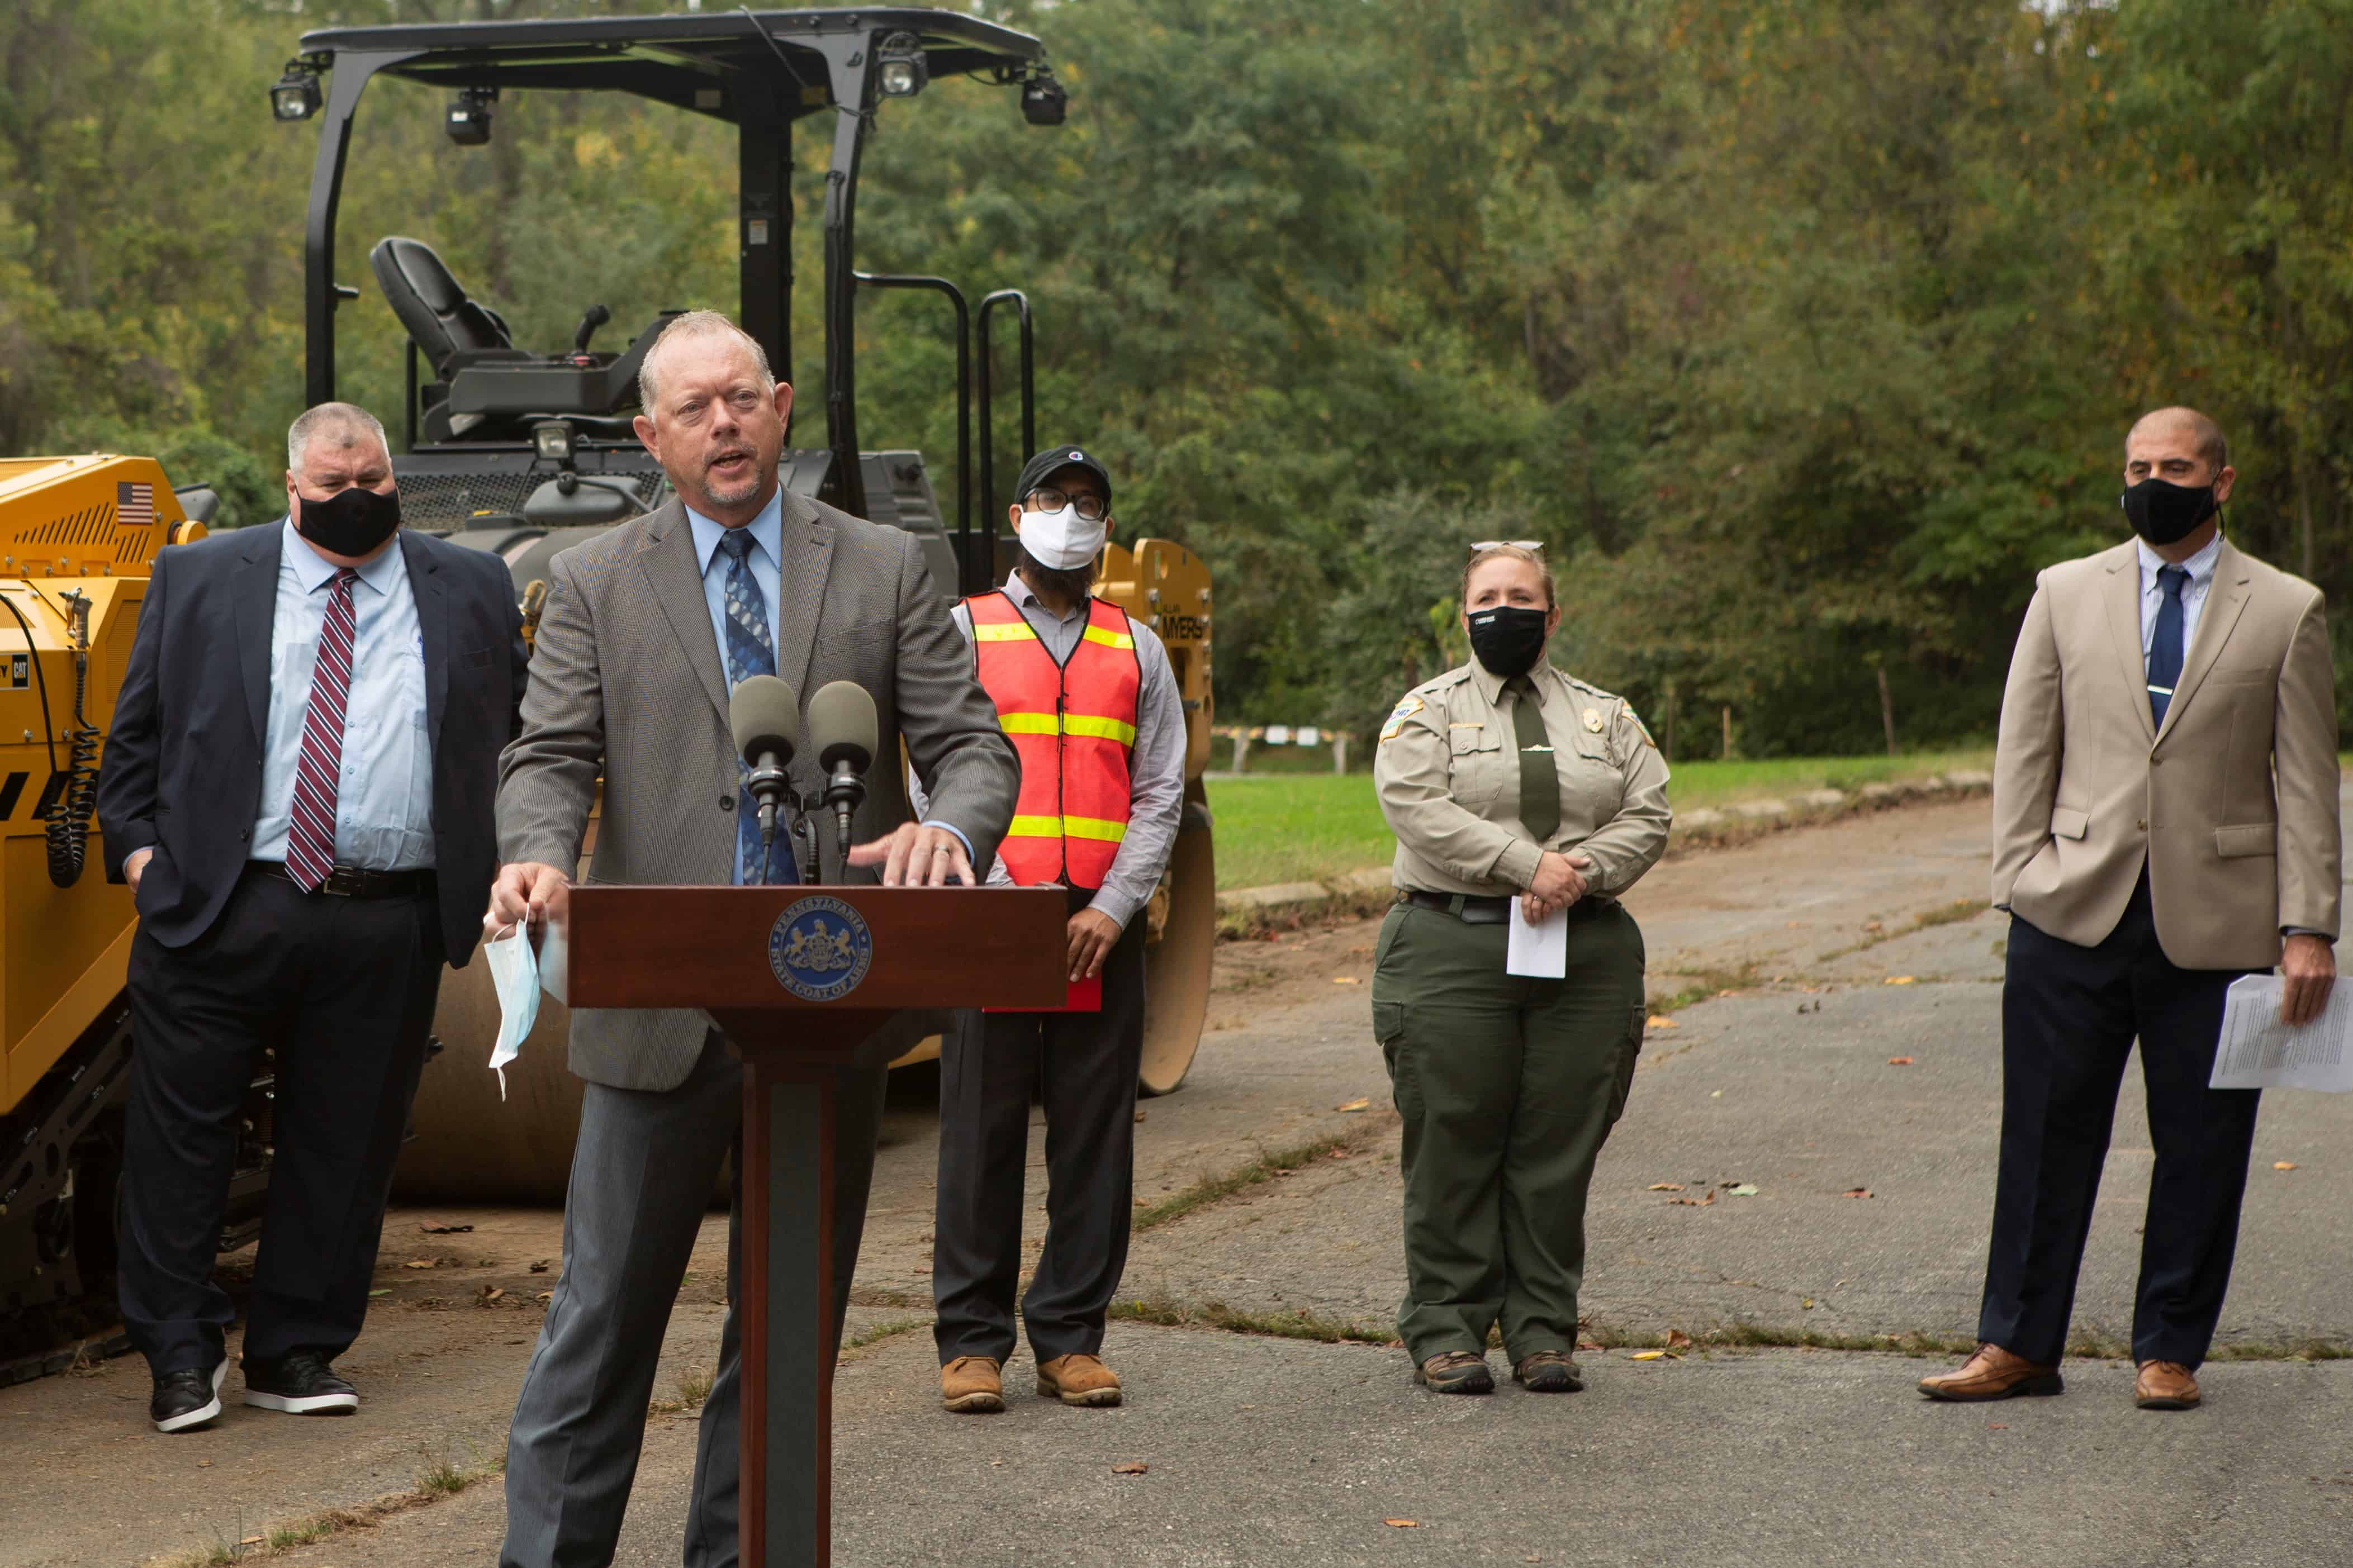 PennDOT's Mike Keiser takes the podium at an event announcing the recycled plastic pilot initiative. Four speakers stand behind him with masks on.